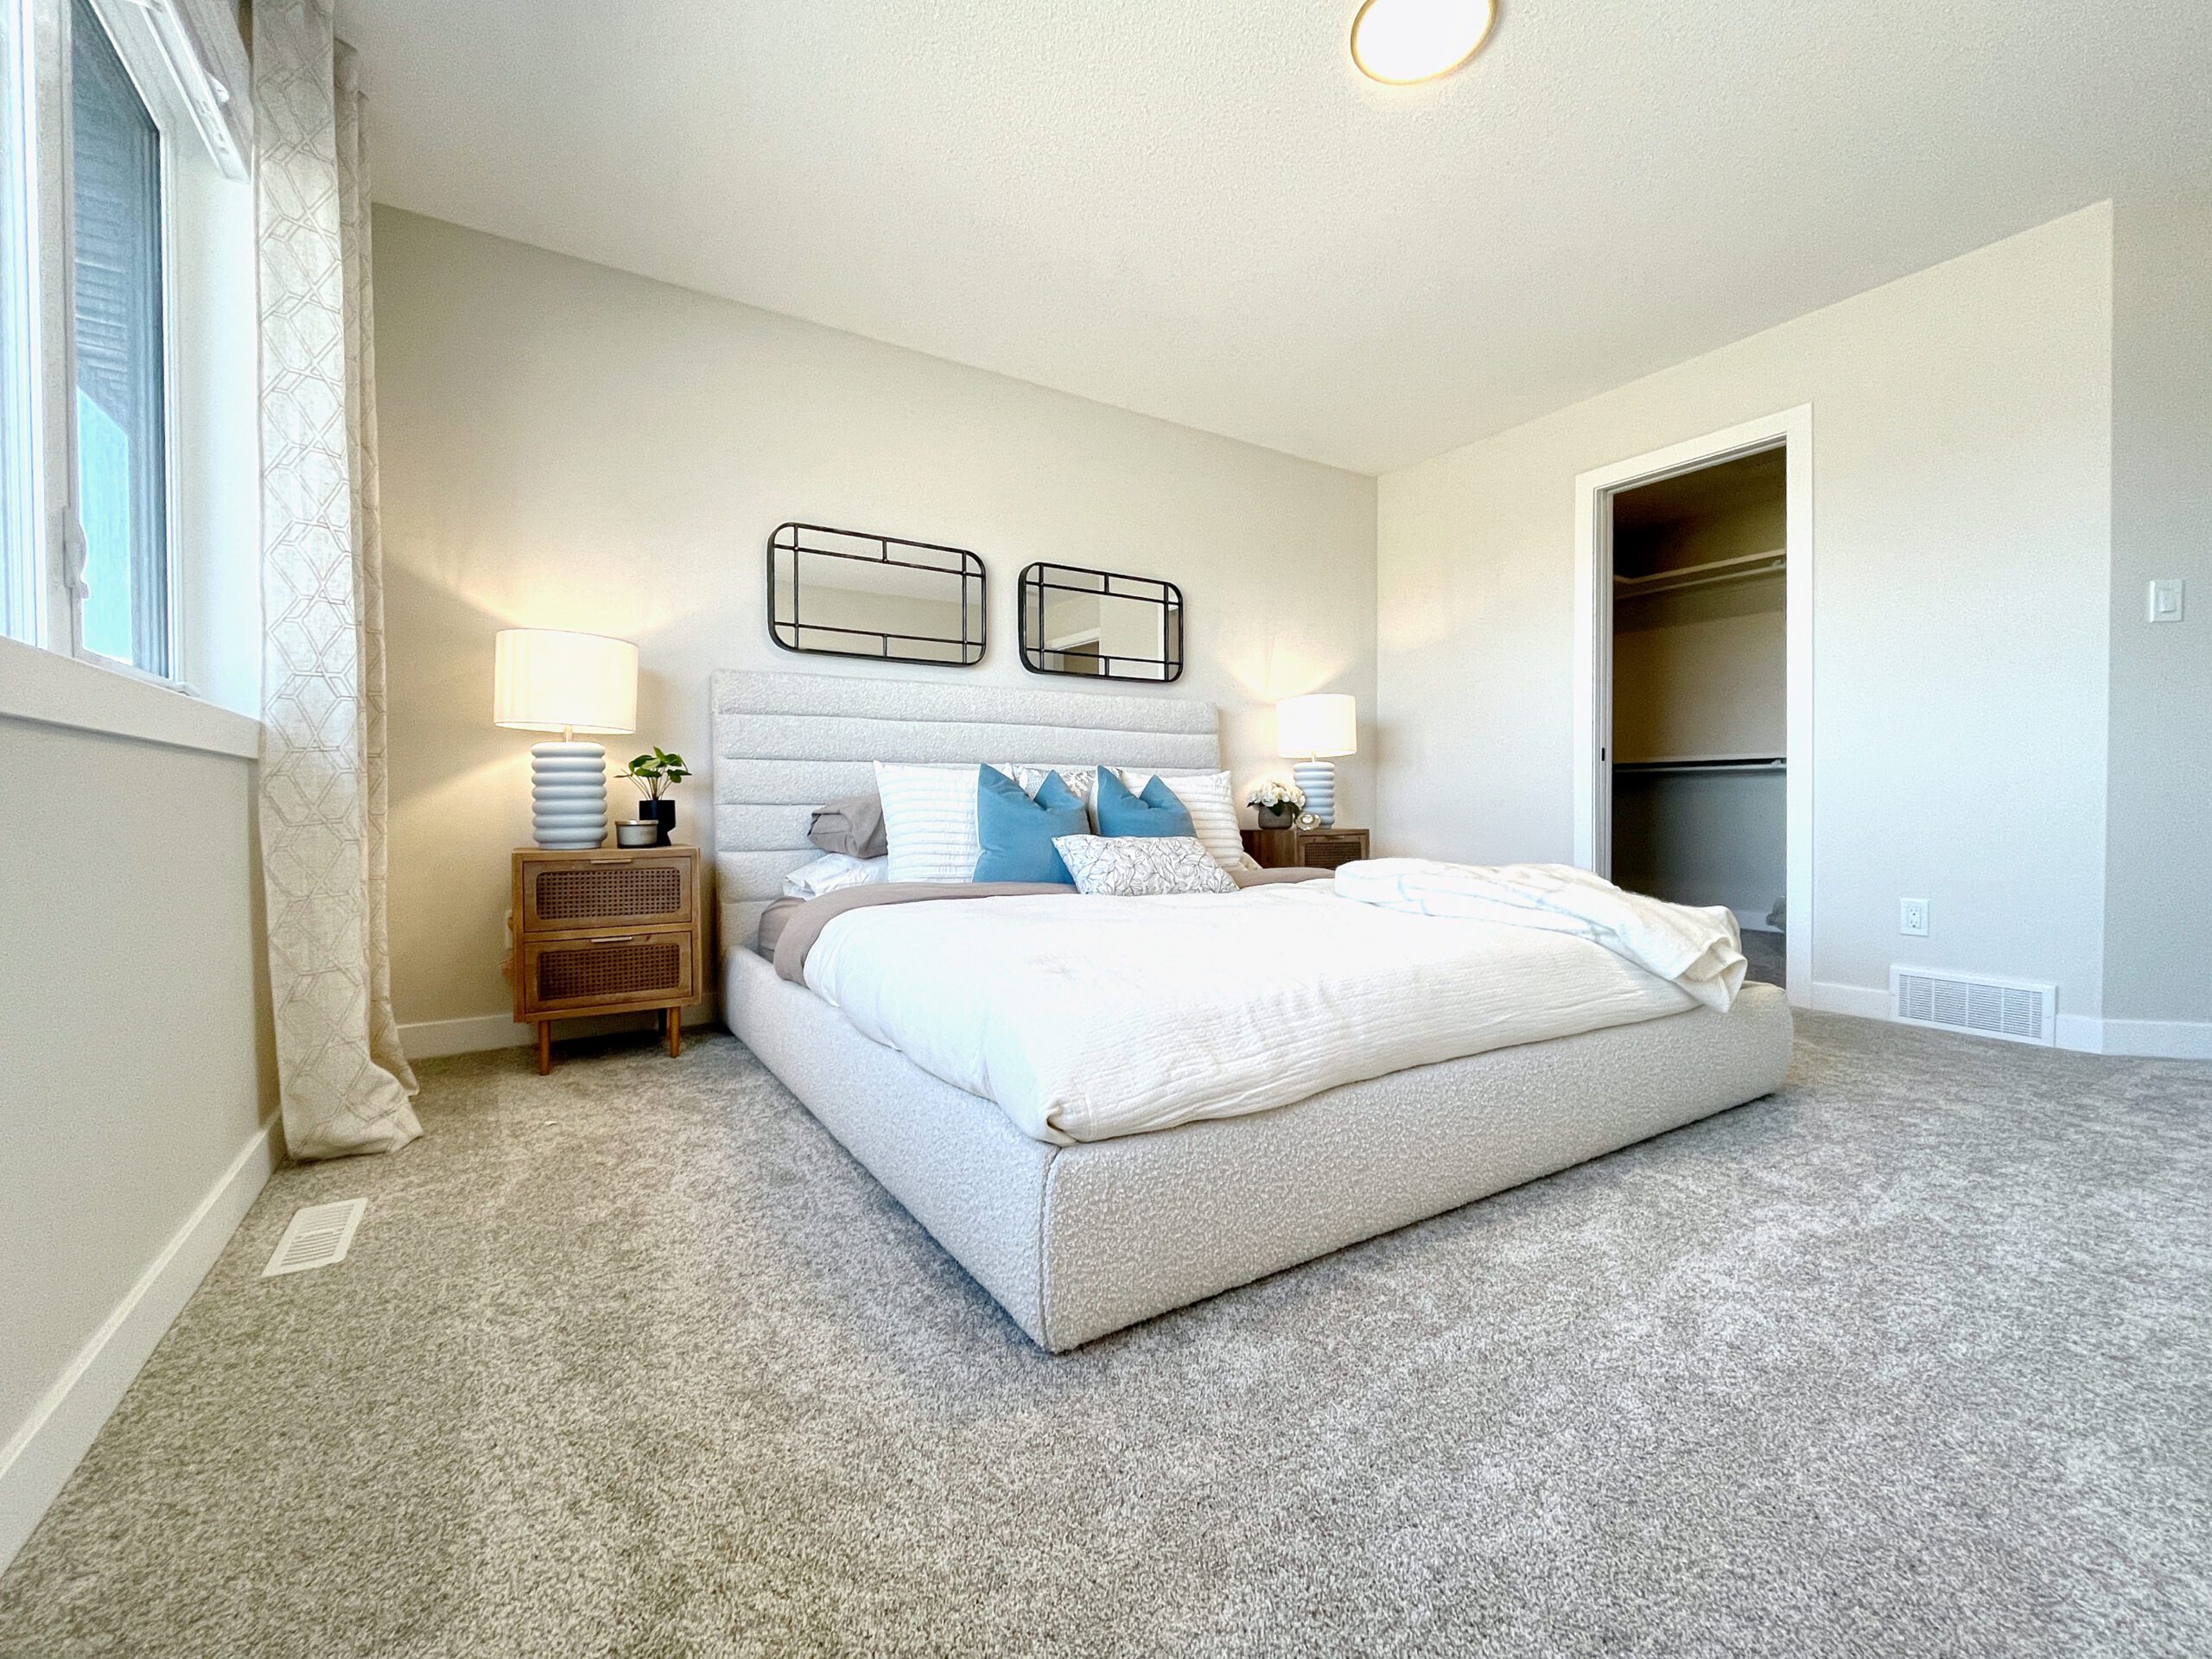 A bedroom with a white bed and gray carpet.